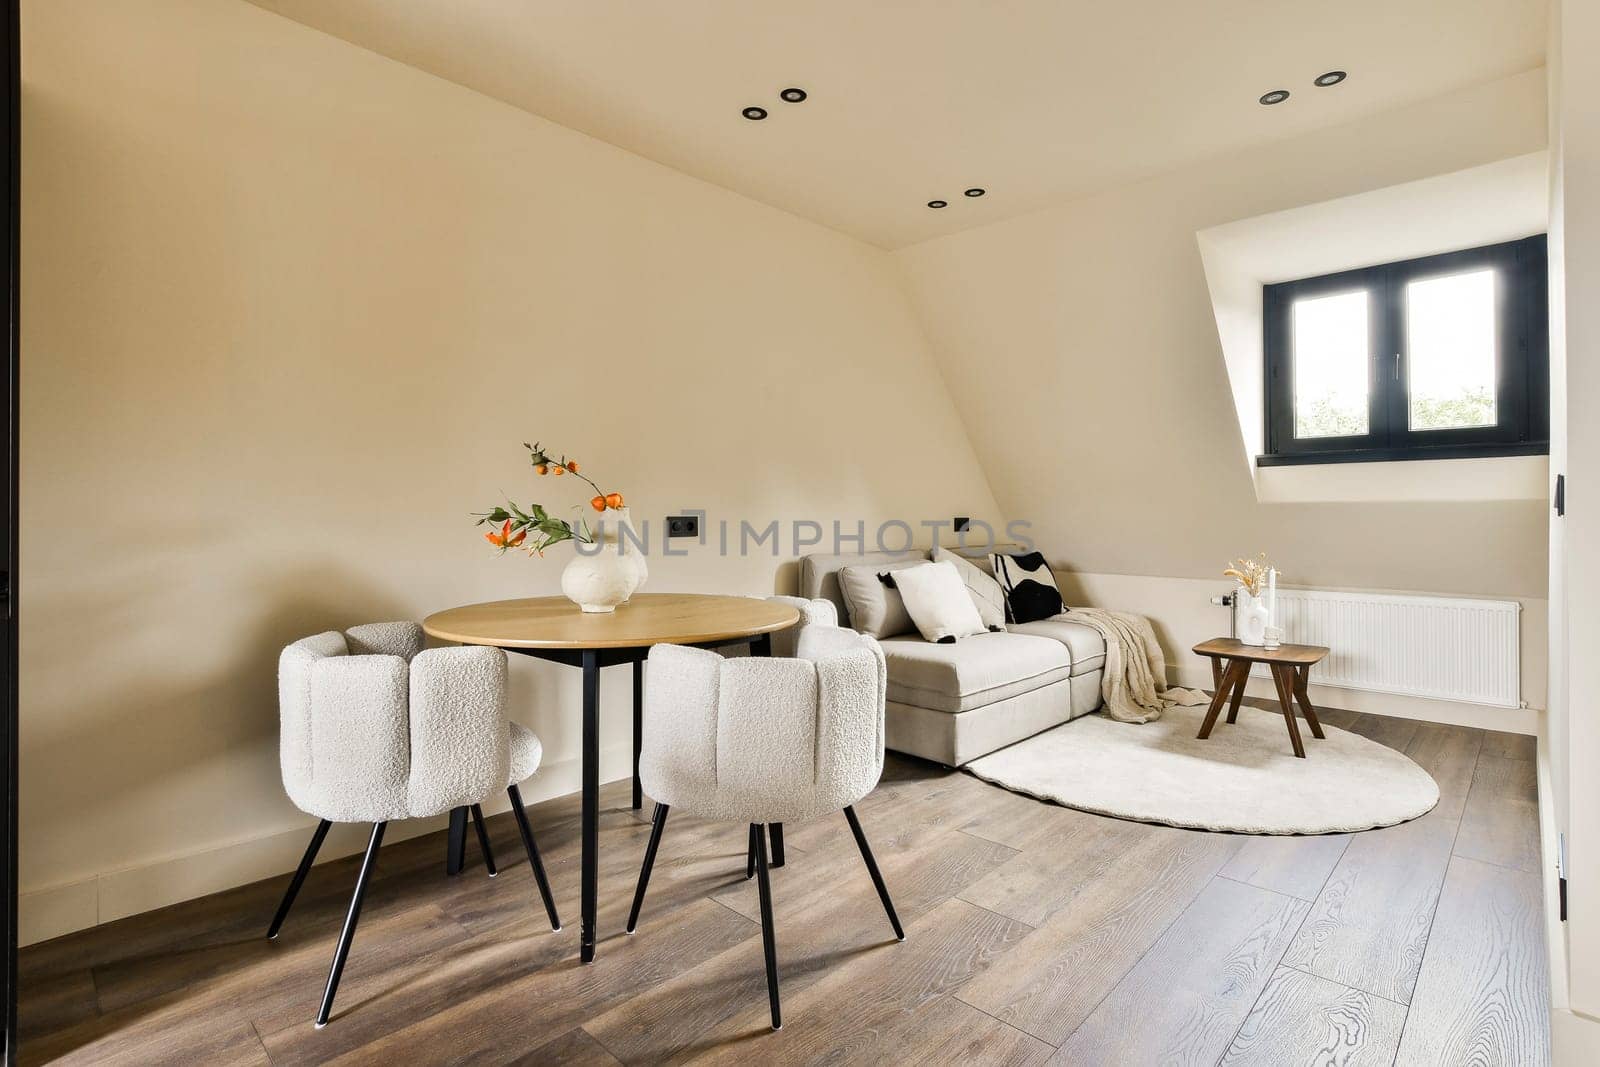 a living room with two chairs and a round table in the middle of the room, there is an open door leading to the